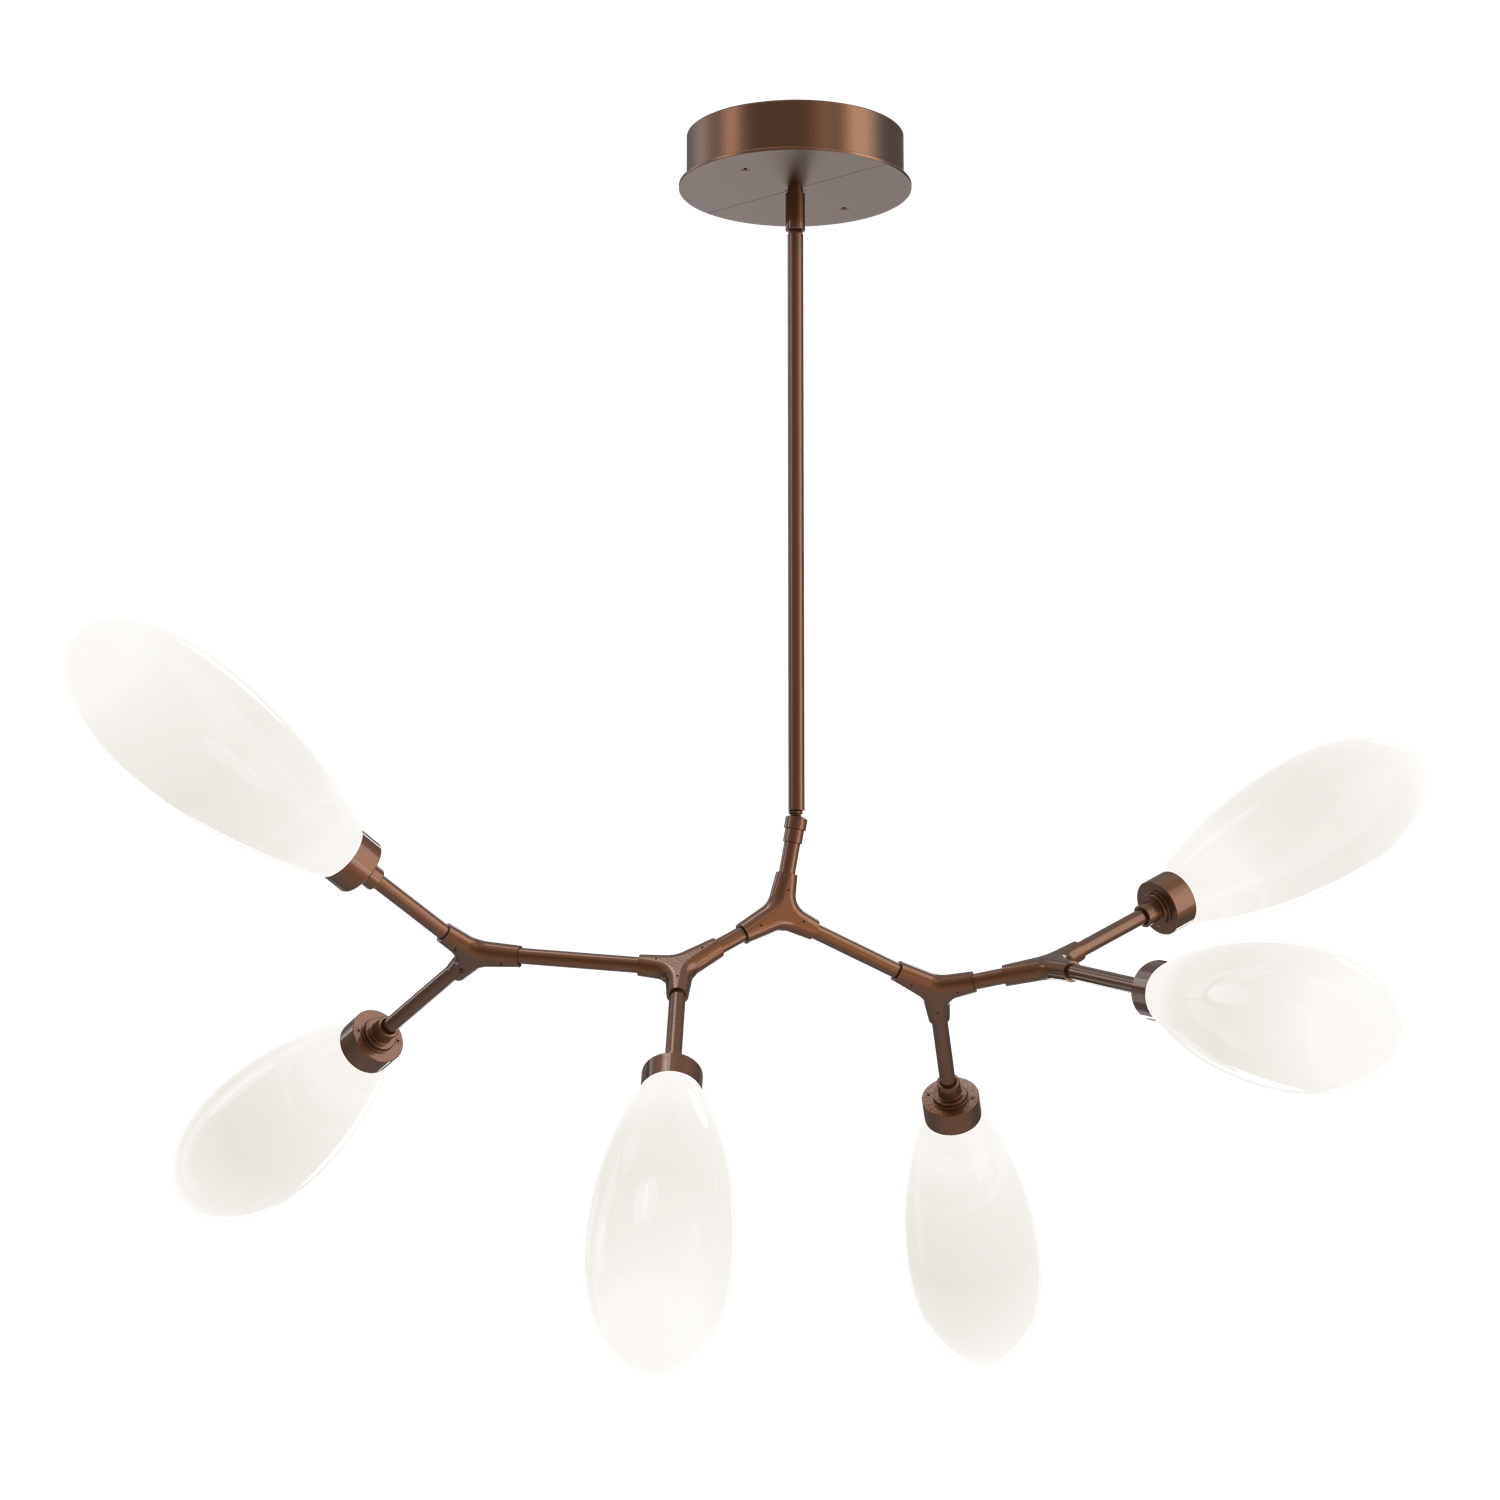 PLB0071-BA-BB-WL-LL-Hammerton-Studio-Fiori-6-light-organic-branch-chandelier-with-burnished-bronze-finish-and-opal-white-glass-shades-and-LED-lamping